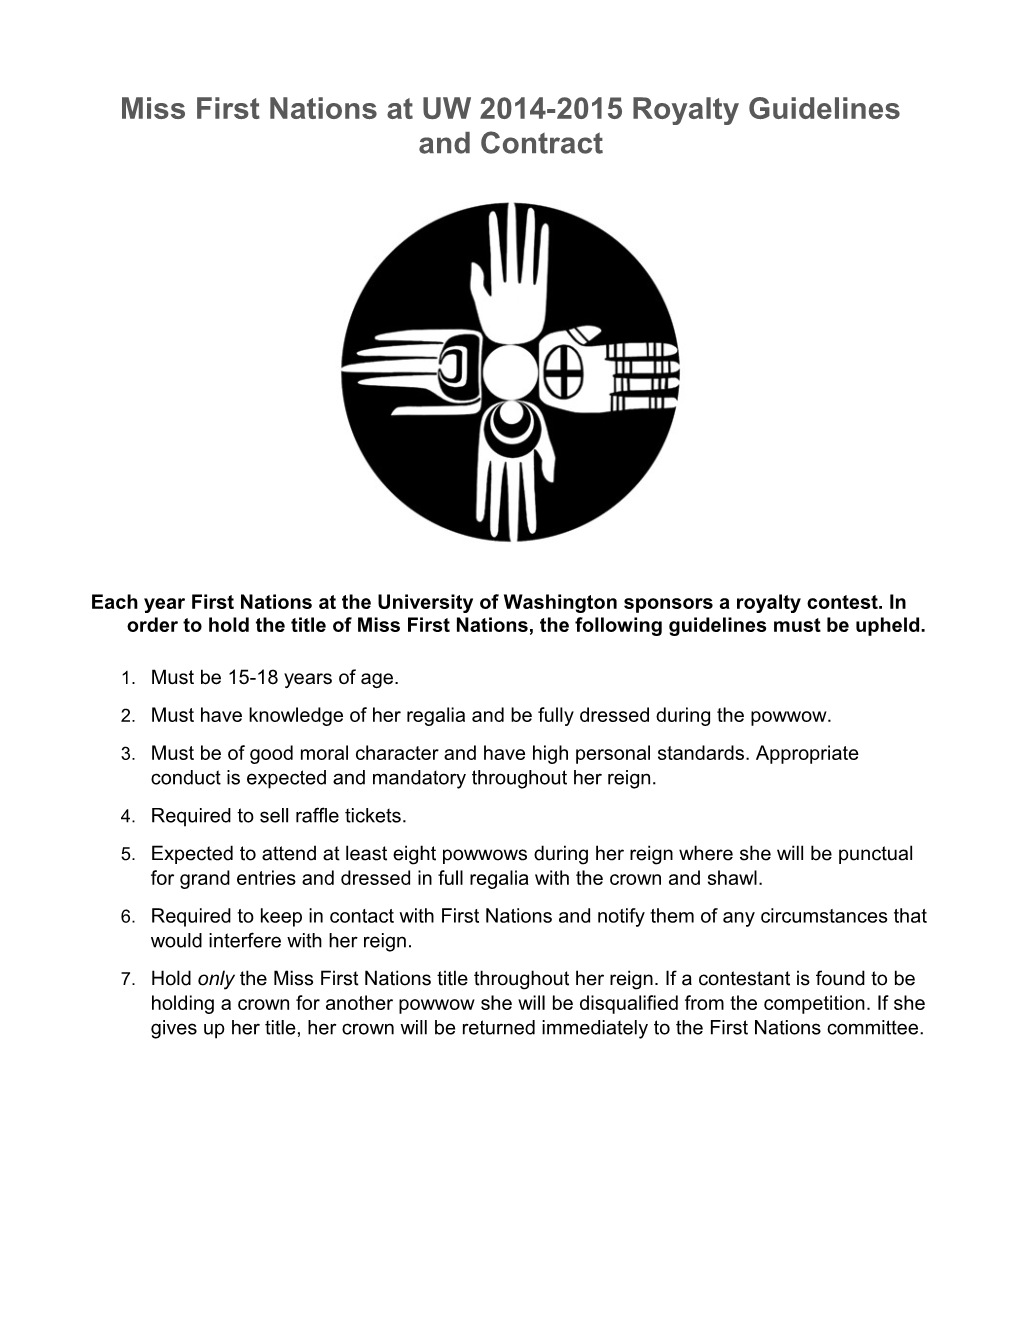 Miss First Nations at UW 2014-2015 Royalty Guidelines and Contract